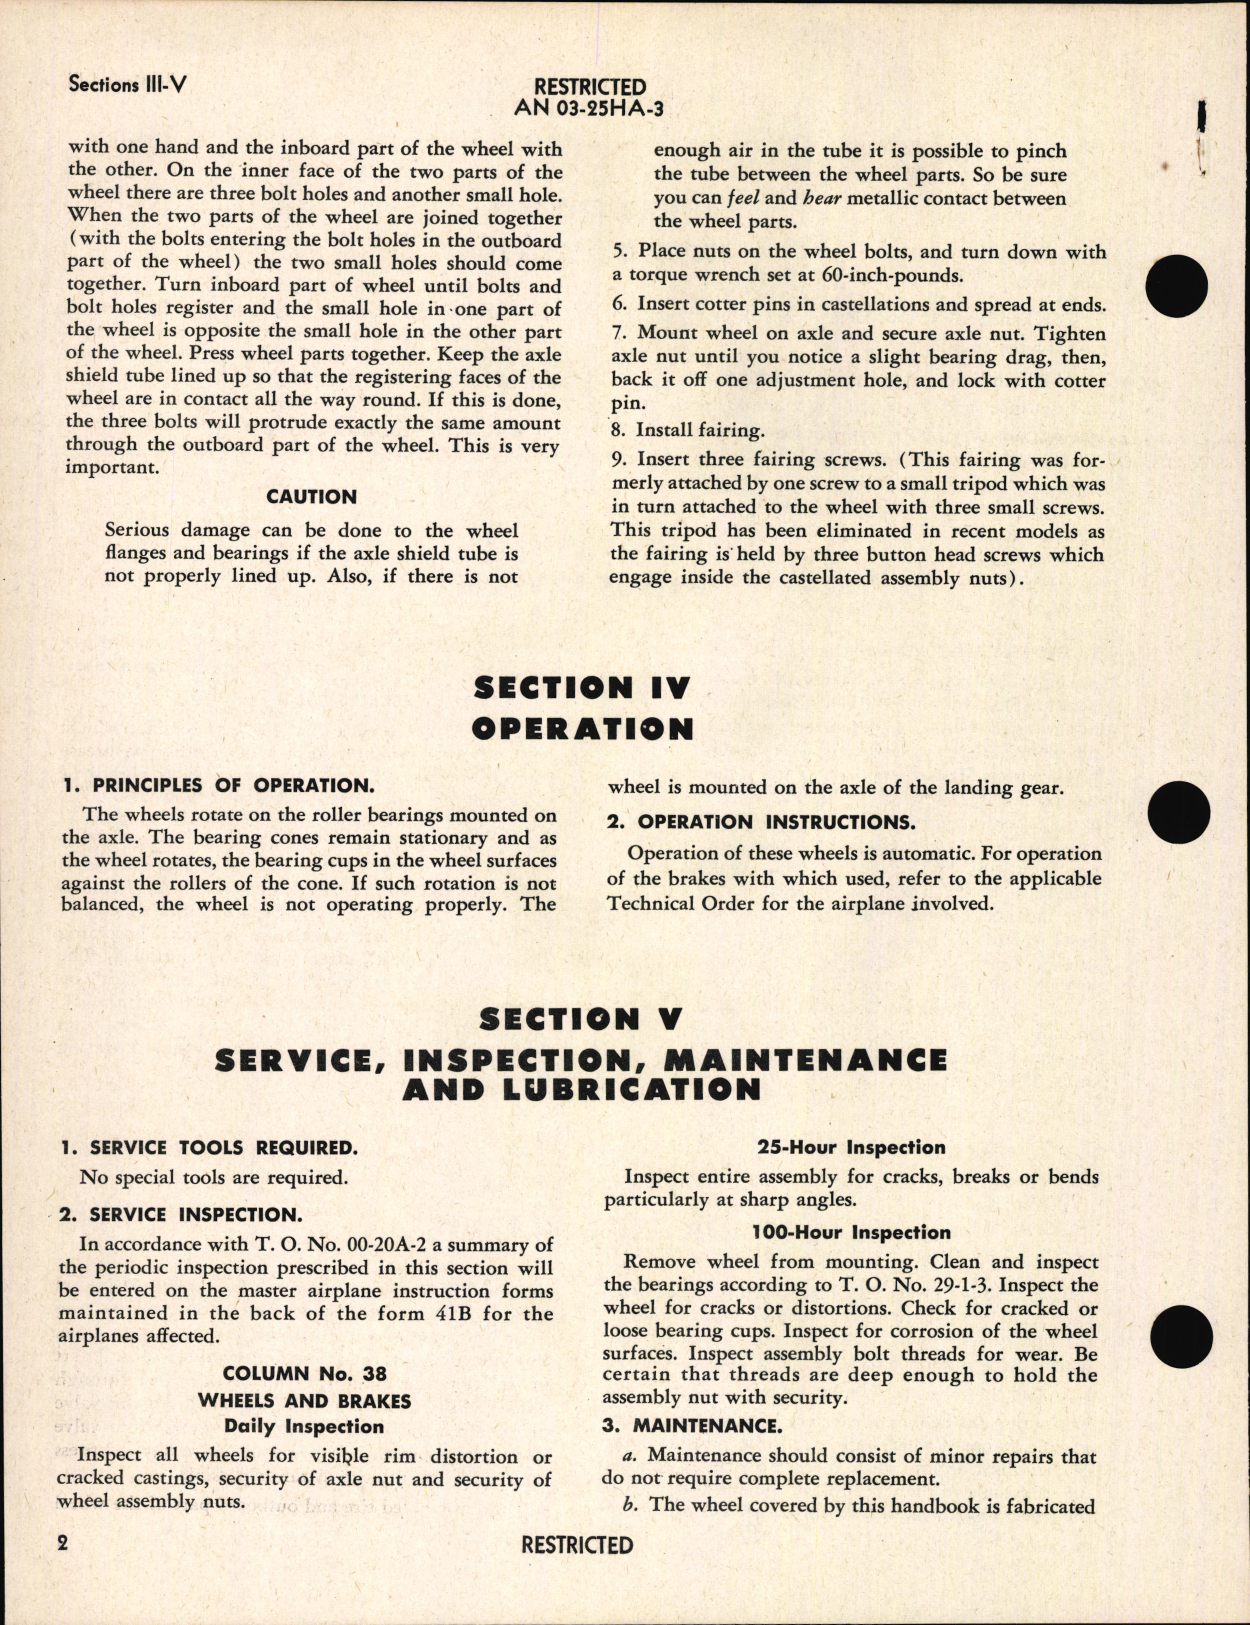 Sample page 6 from AirCorps Library document: Handbook of Instructions with Parts Catalog for Low Pressure Landing Wheels